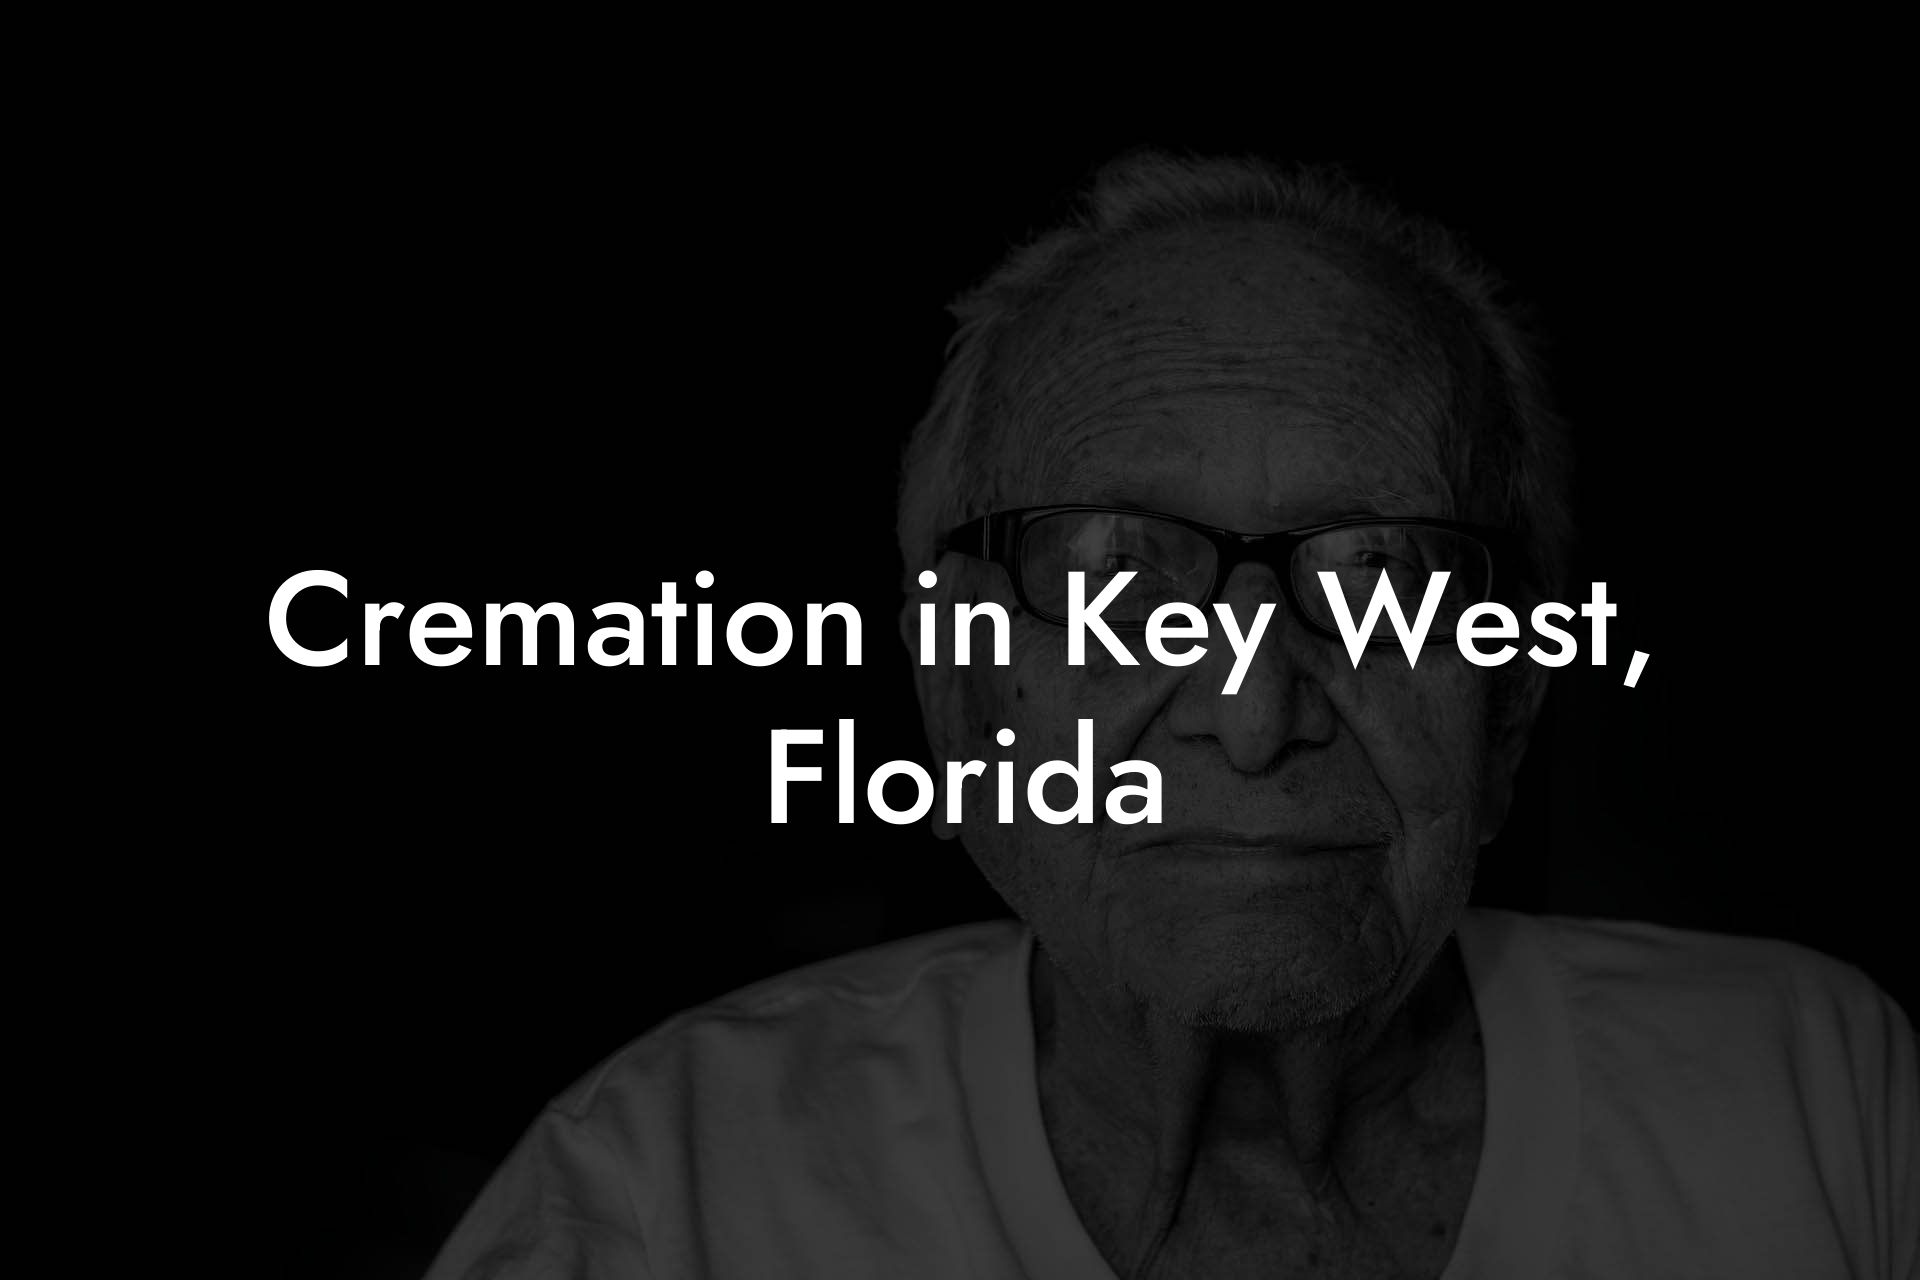 Cremation in Key West, Florida